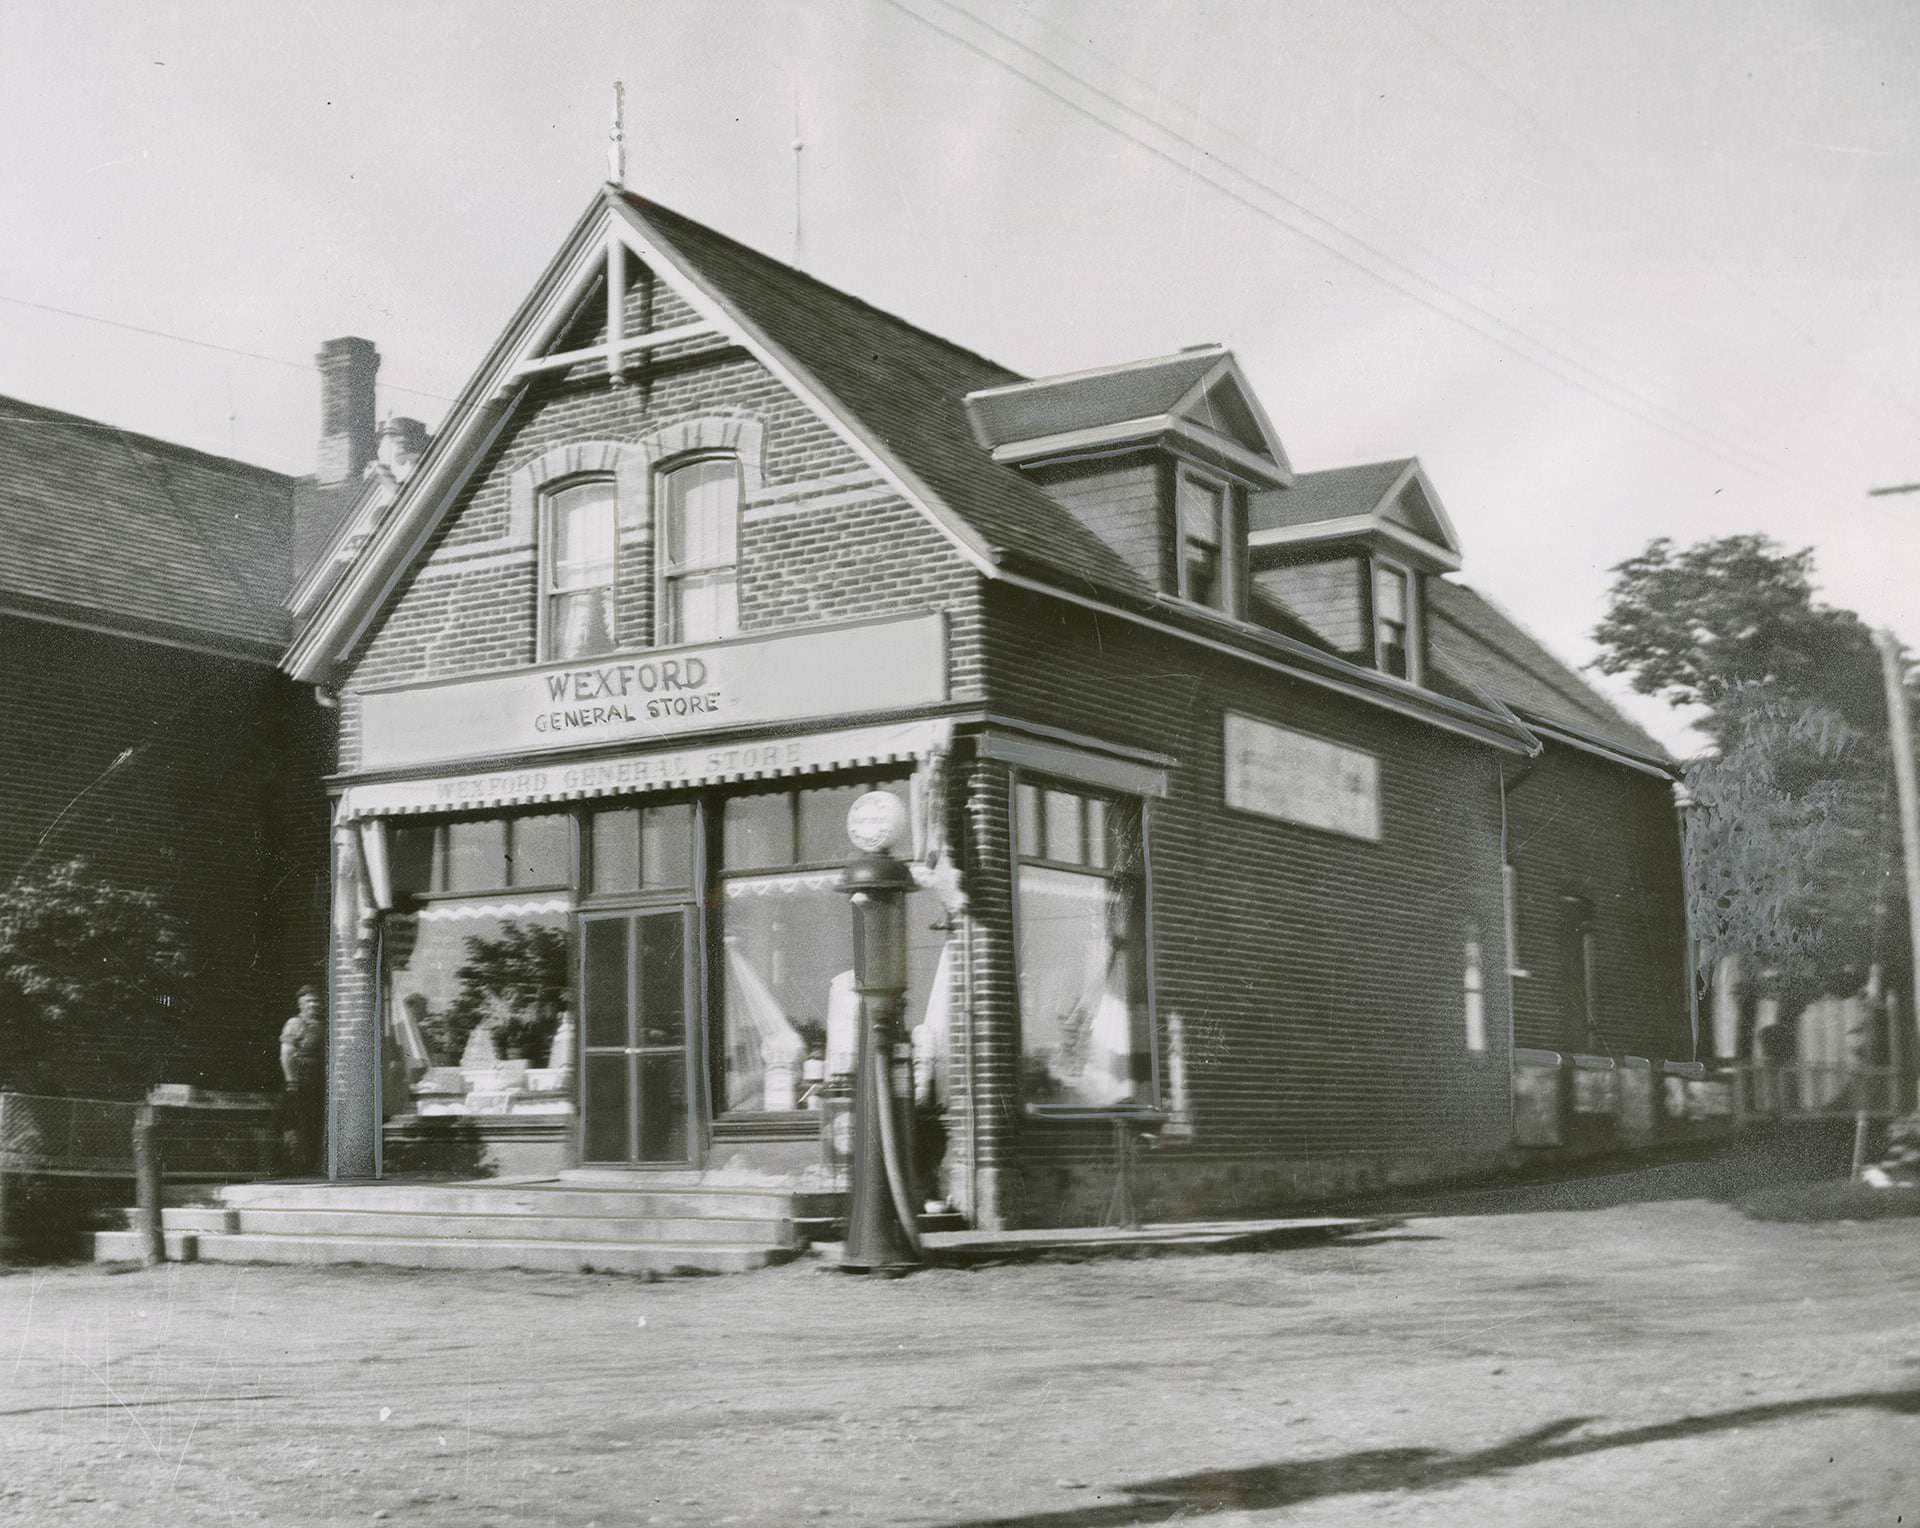 Wexford landmark razed. One of the last links with Wexford village's past, an 1883-vintage store at the southwest corner of Lawrence and Pharmacy Aves. in Scarboro township is being torn down to widen Lawrence Avenue., 1960